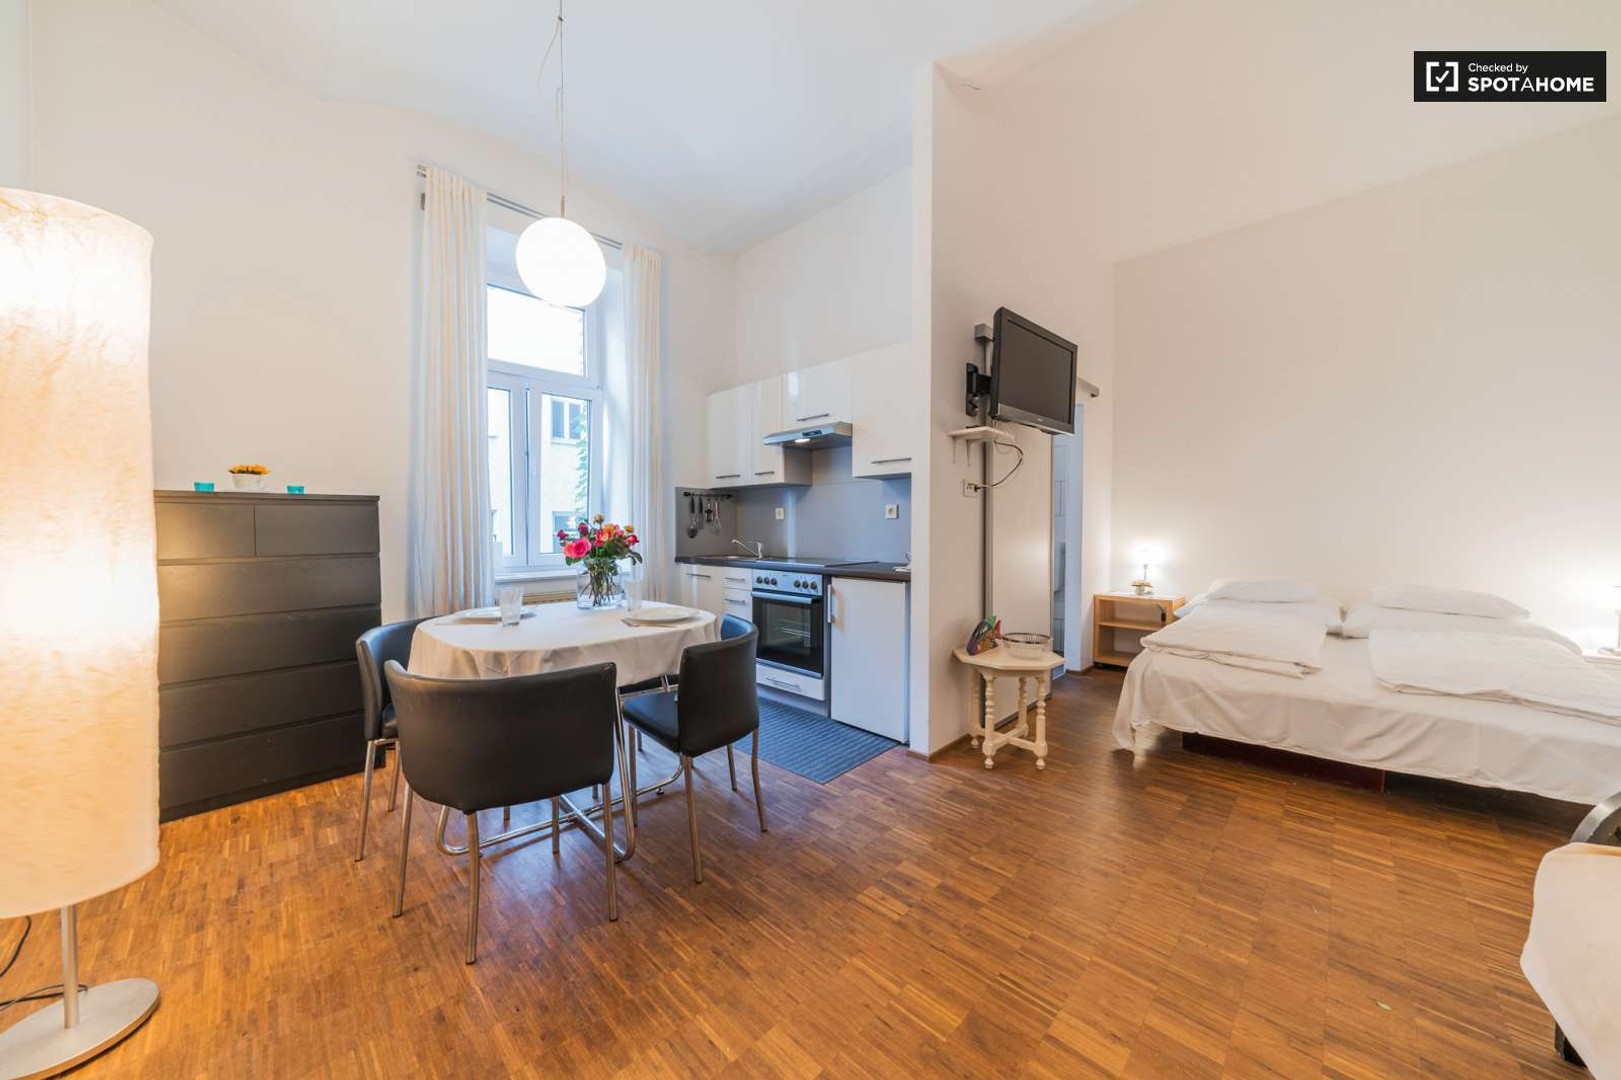 Very bright studio for rent in Vienna